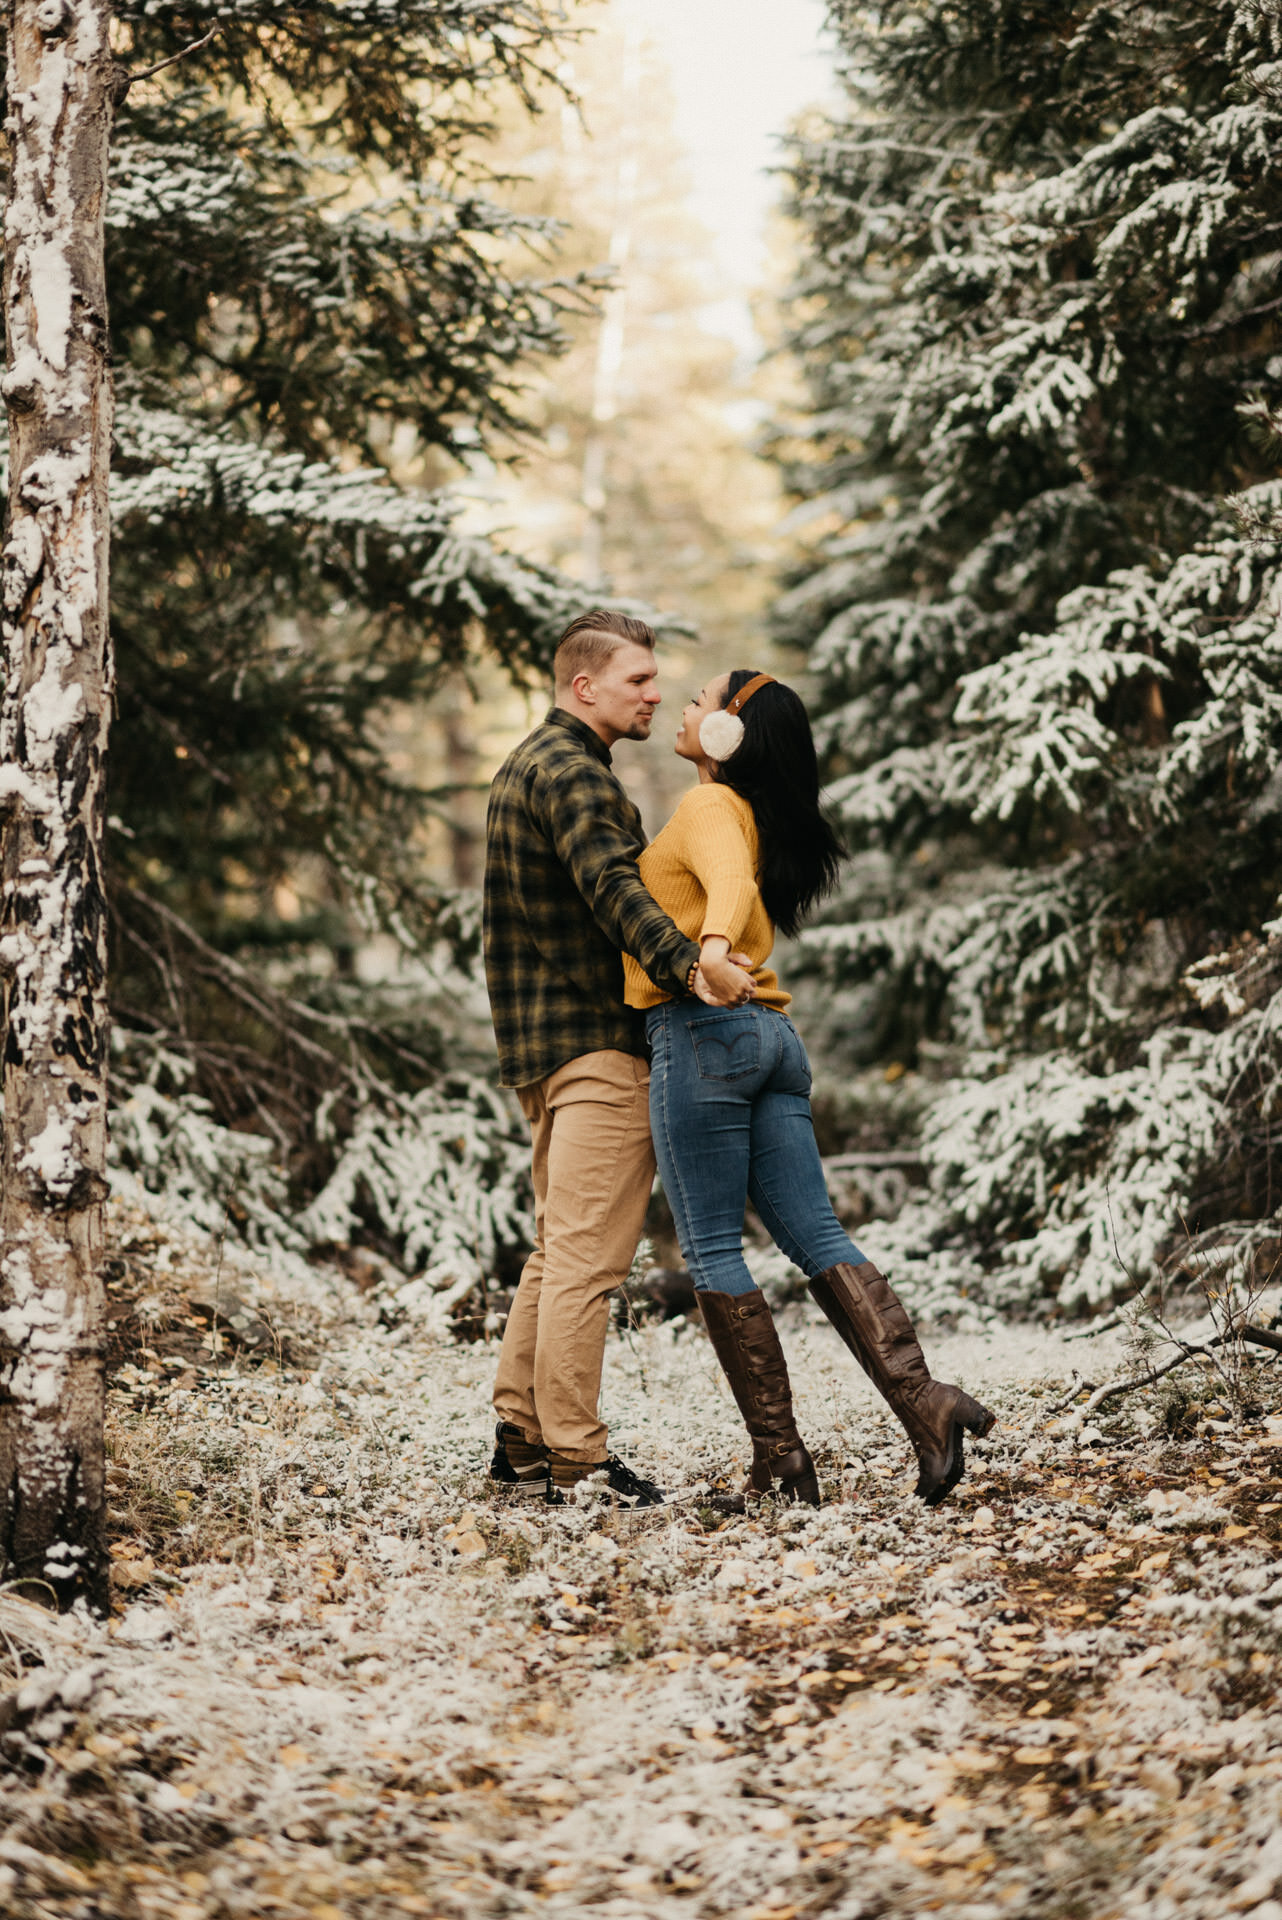 kelsey-rob-snowy-fall-leaves-evergreen-colorado-engagement-session-18.jpg